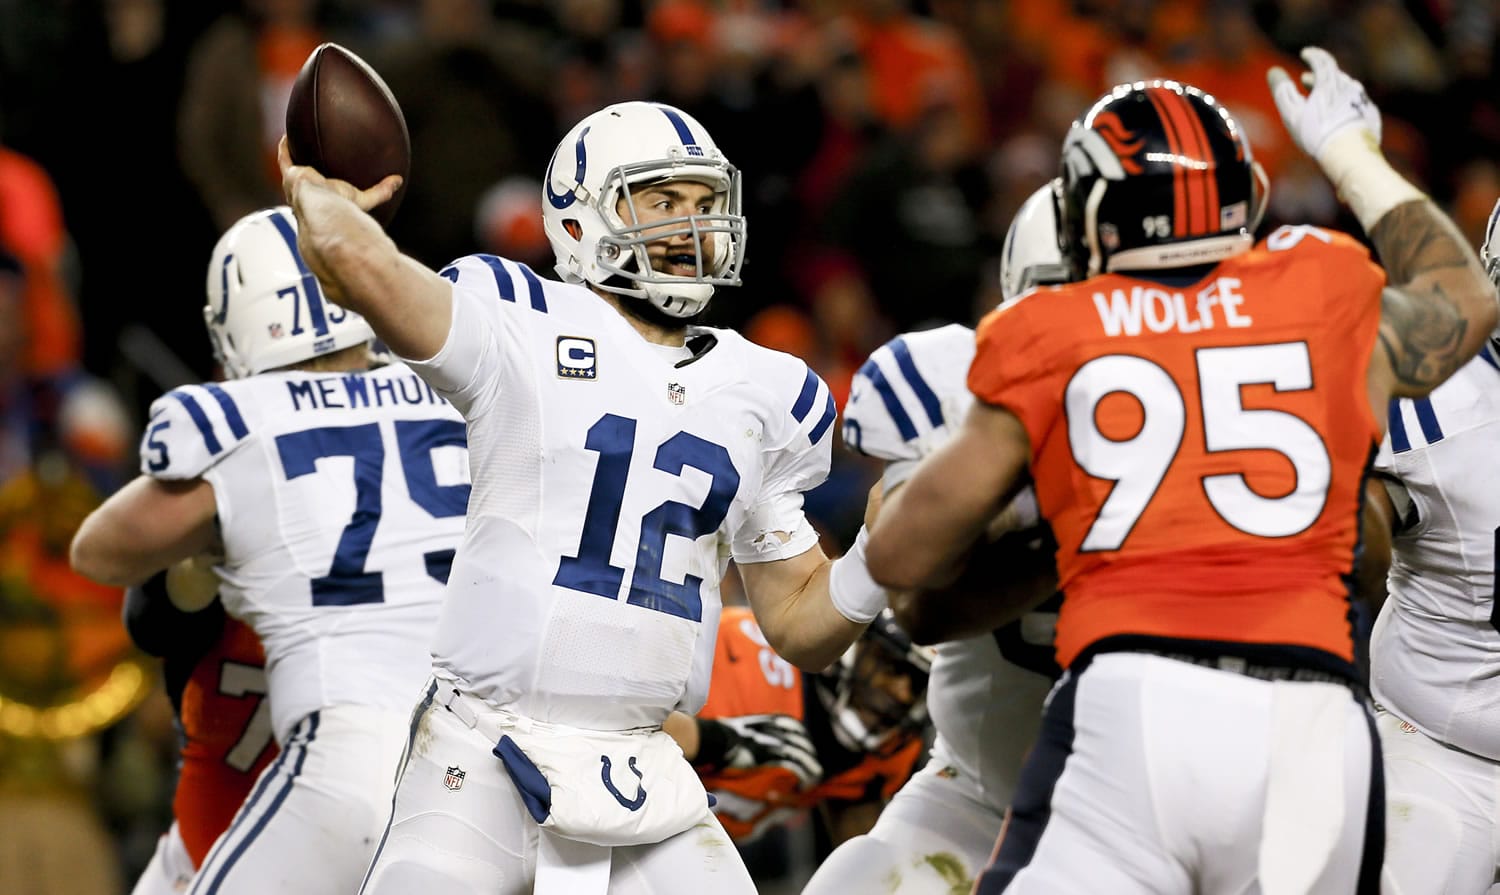 Indianapolis Colts quarterback Andrew Luck, left, throws under pressure from Denver Broncos defensive end Derek Wolfe during the second half of an NFL divisional playoff game, Sunday, Jan. 11, 2015, in Denver.